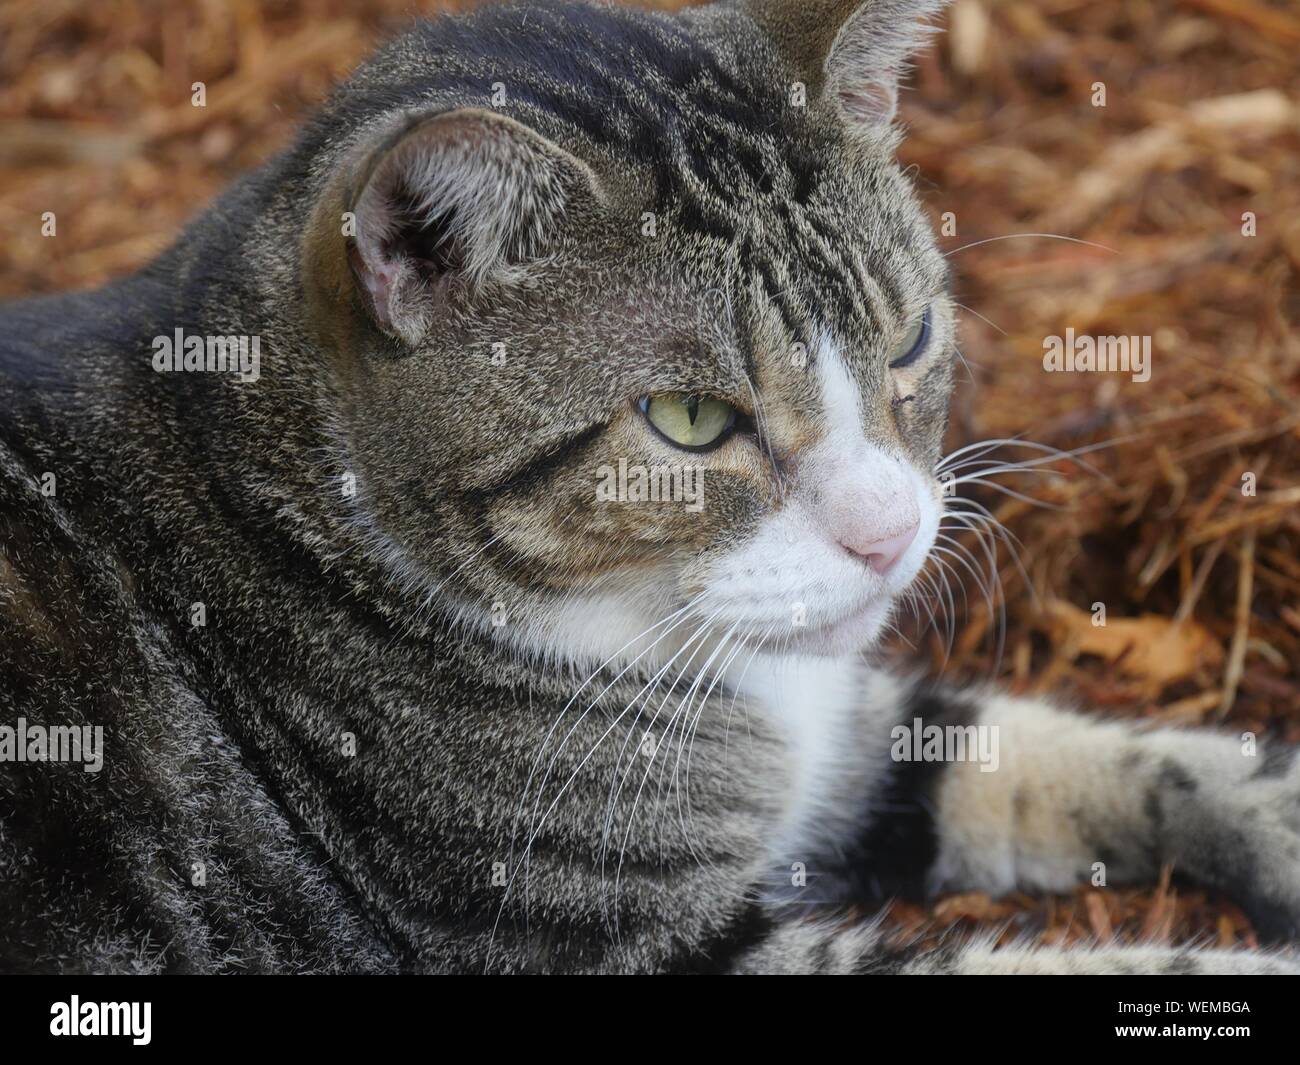 Close up head shot of one of the famous cats at the Hemingway house gardens in Key West, Florida. Stock Photo